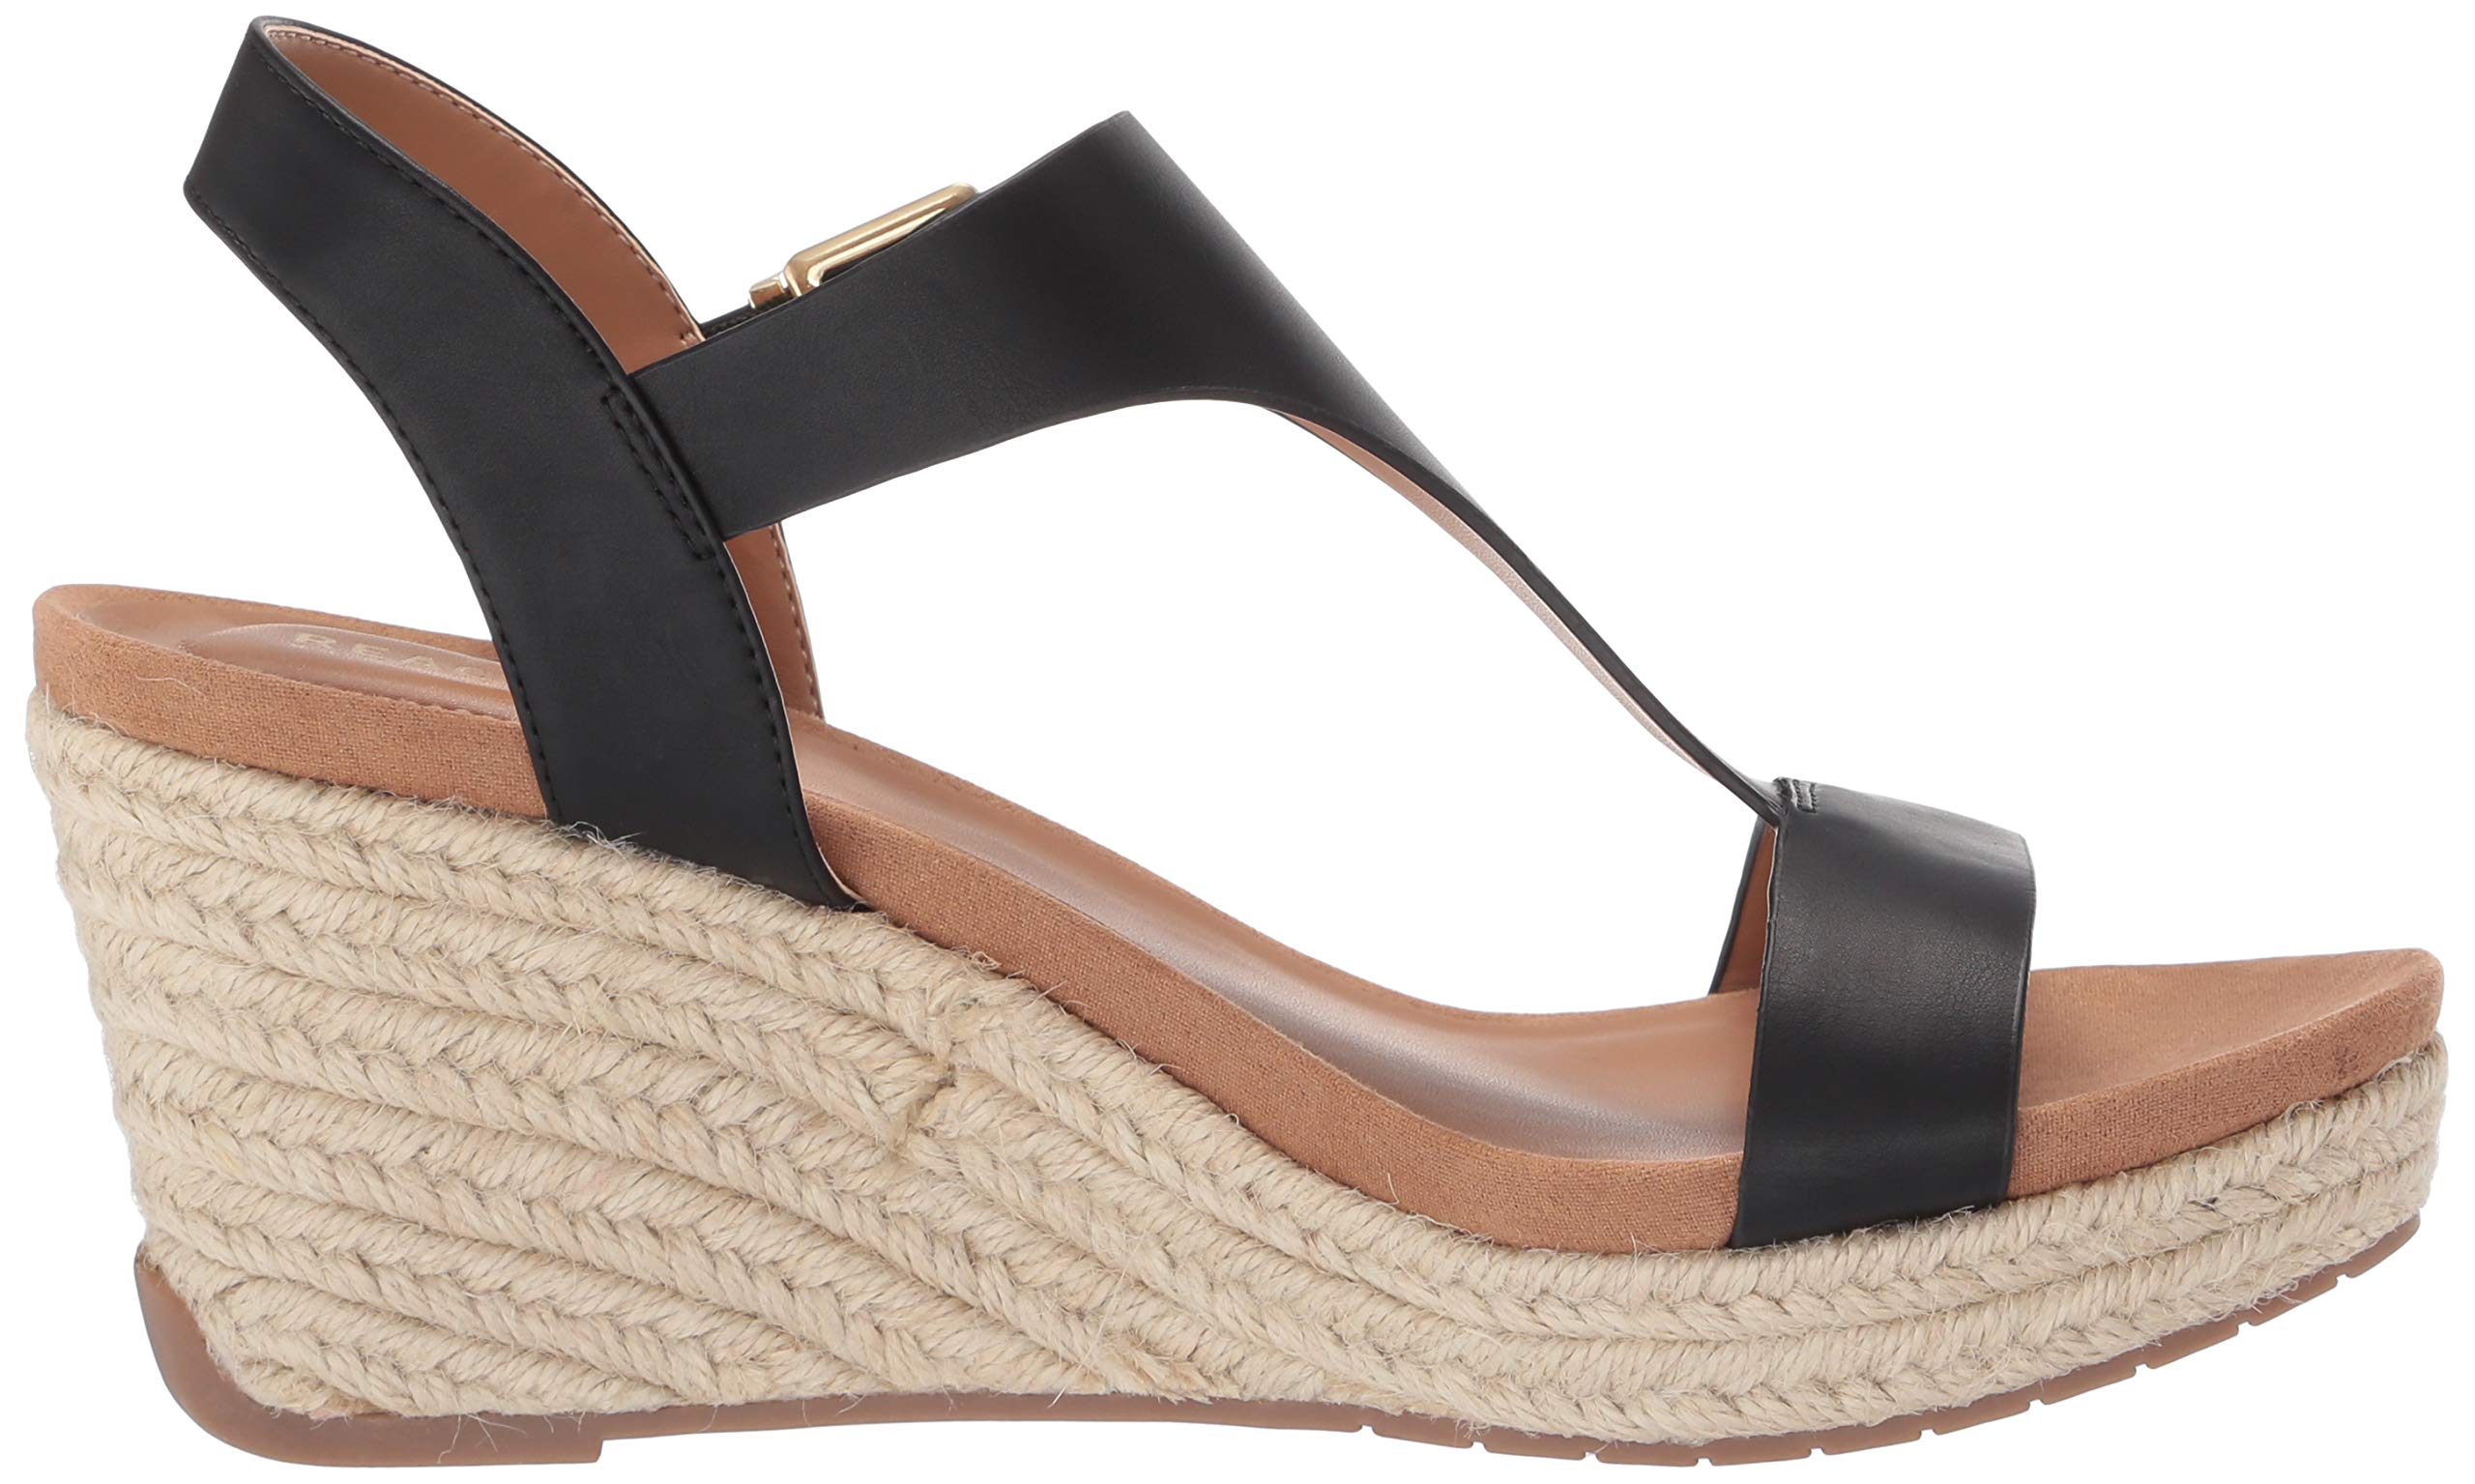 Kenneth Cole Reaction Women's Card T-Strap Wedge Sandal